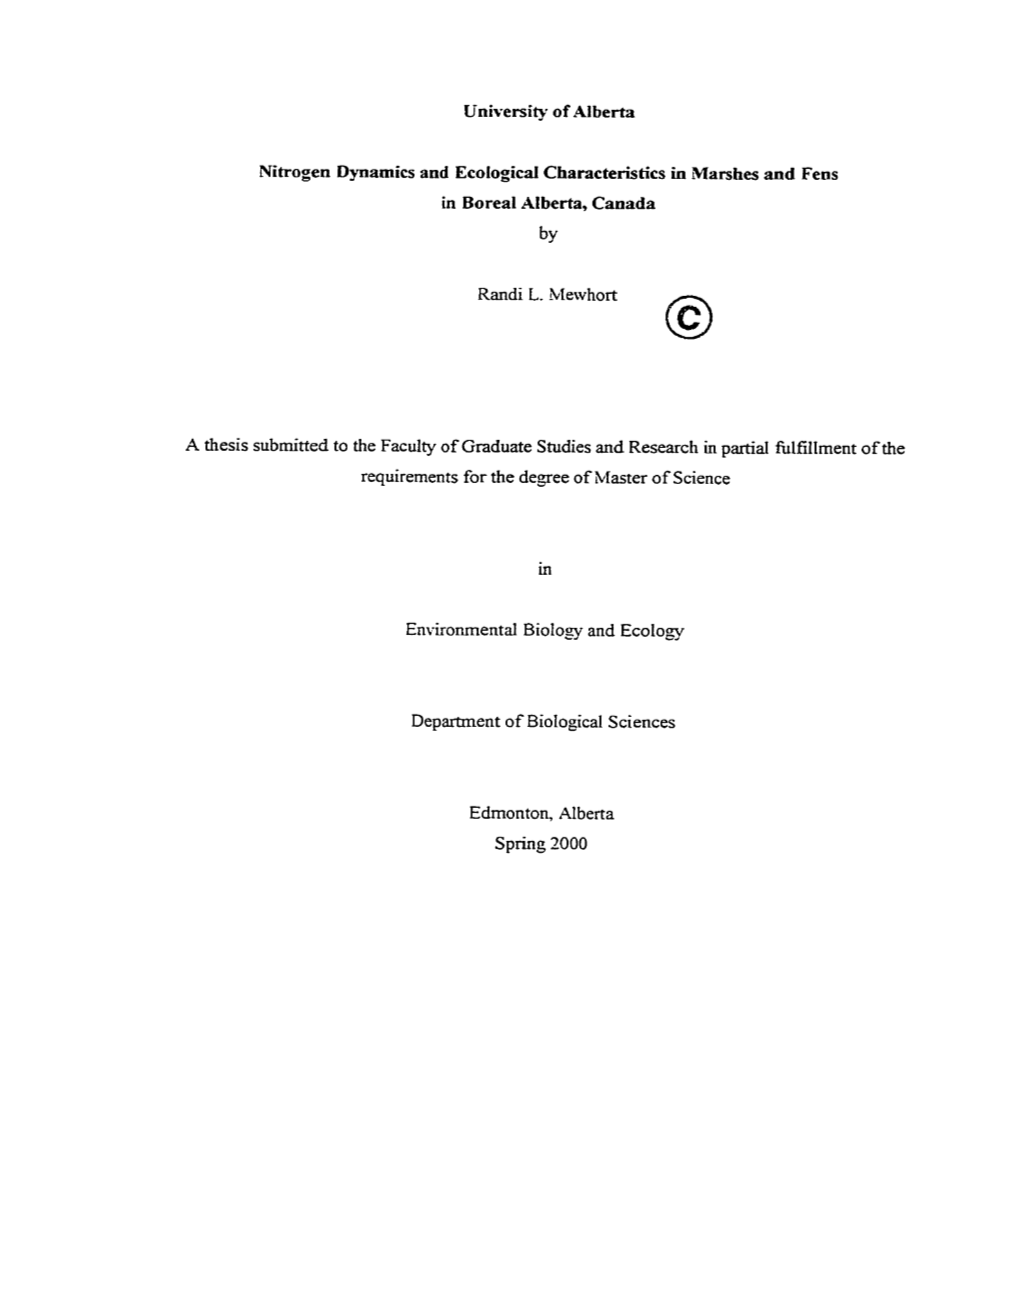 By a Thesis Submitted to the Faculty of Graduate Studies and Research In